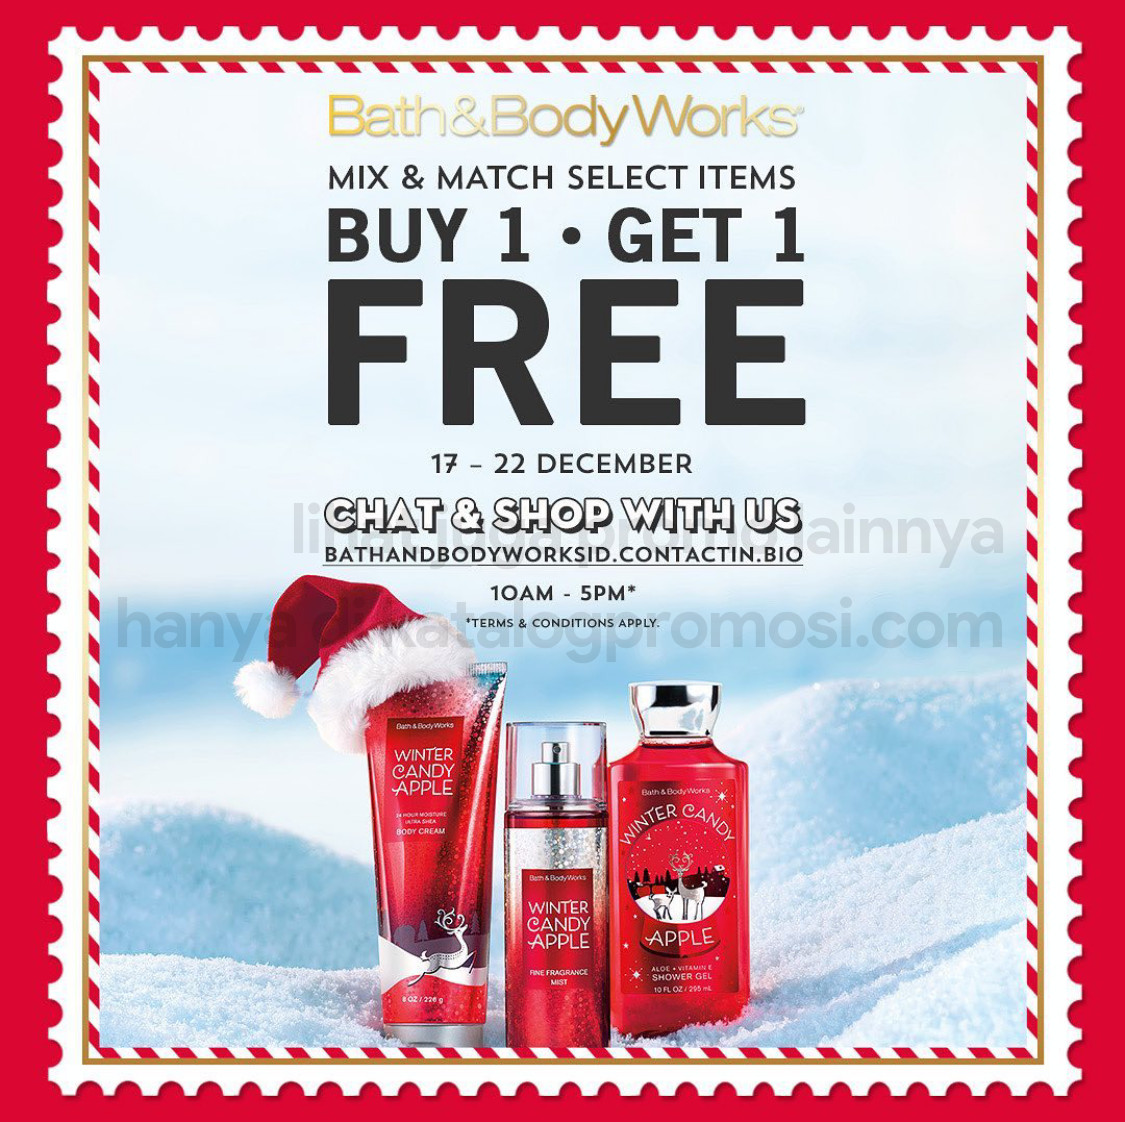 Promo Bath & Body Works Mix and match - BUY 1 GET 1 FREE selected items